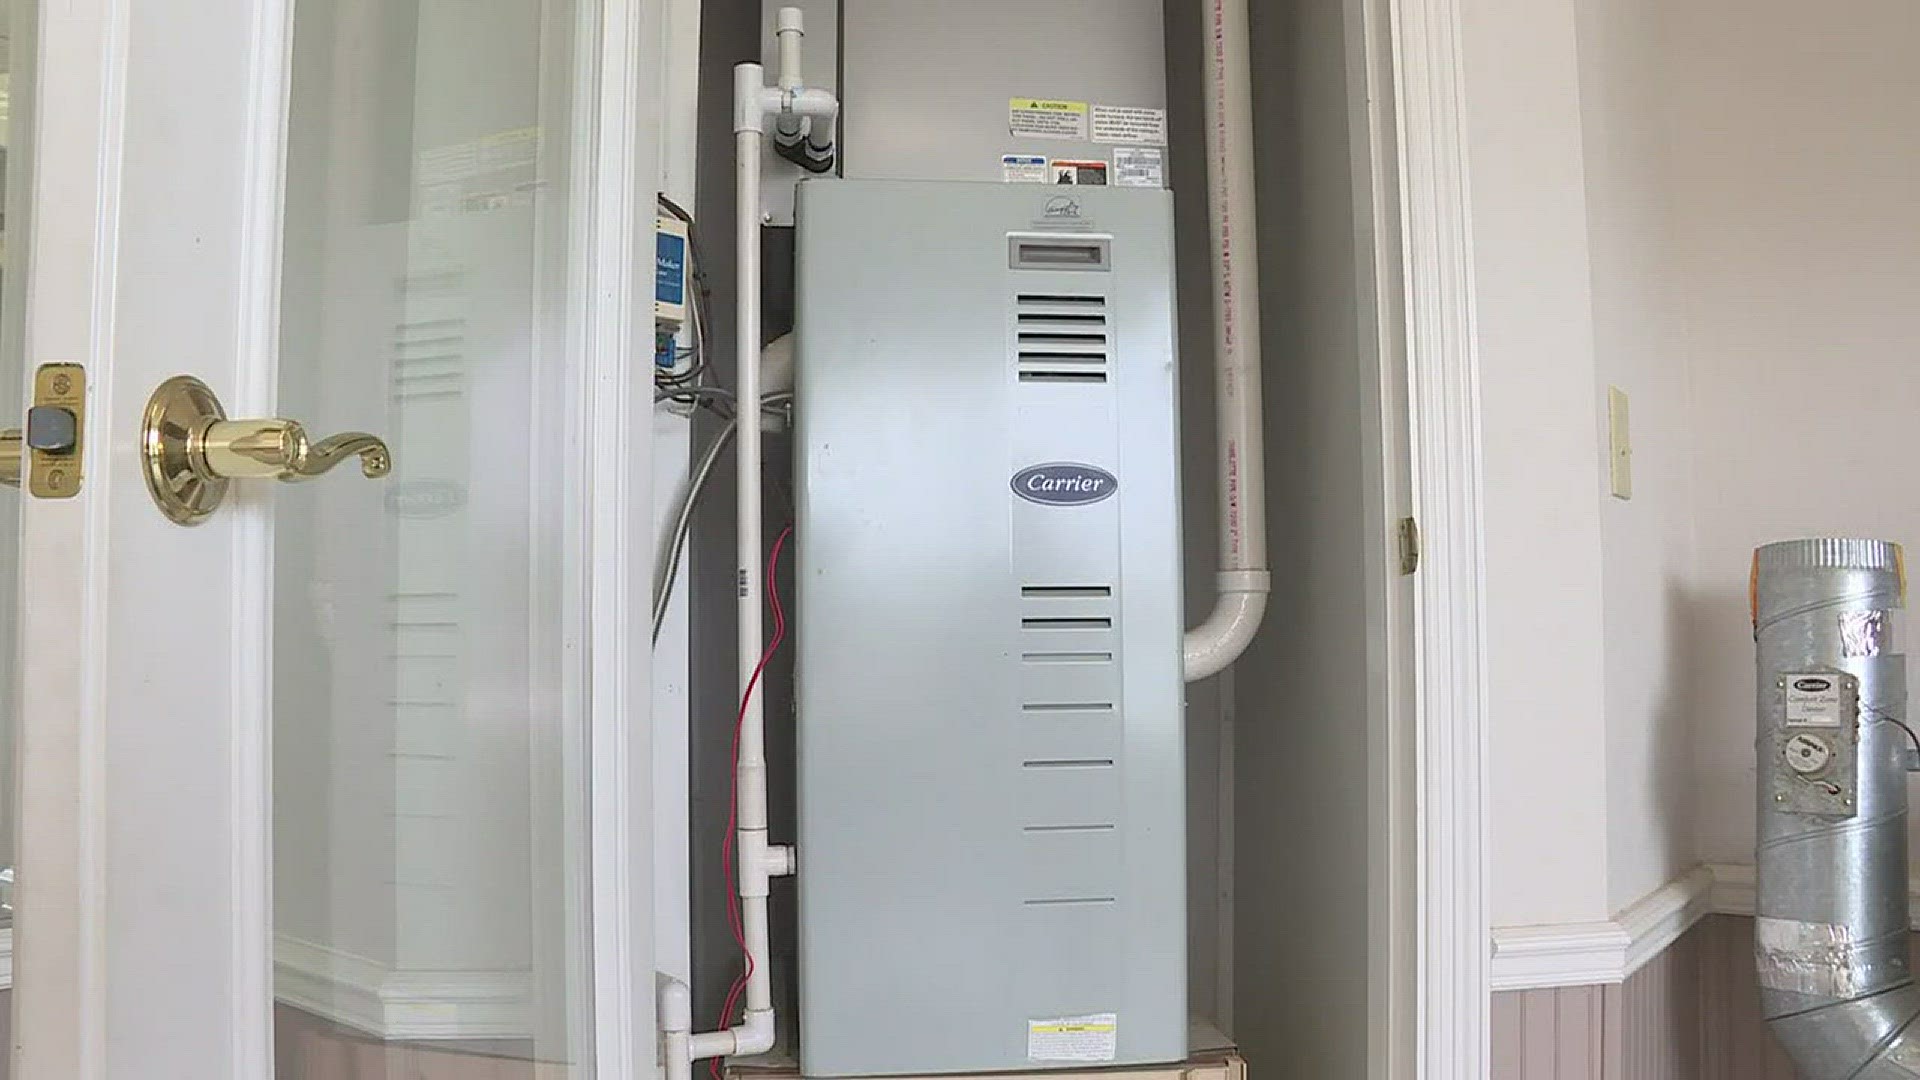 With temperatures in Texas reaching the mid 90s most of us are cranking up our air conditioning unit, but that could be running up your electric bill. But does turning it up while your away save money?